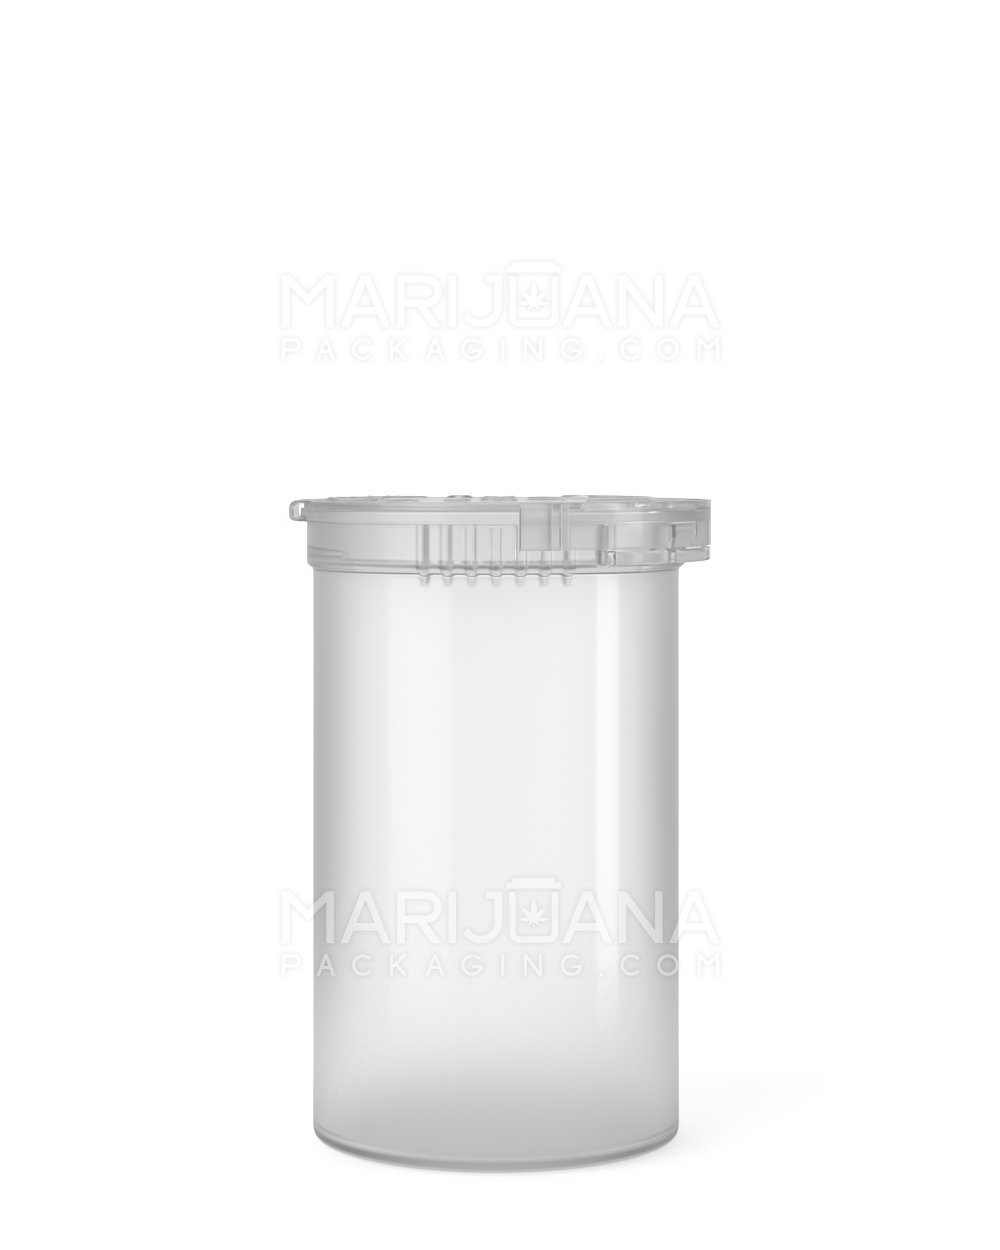 Wholesale Squeeze Pop Top Containers